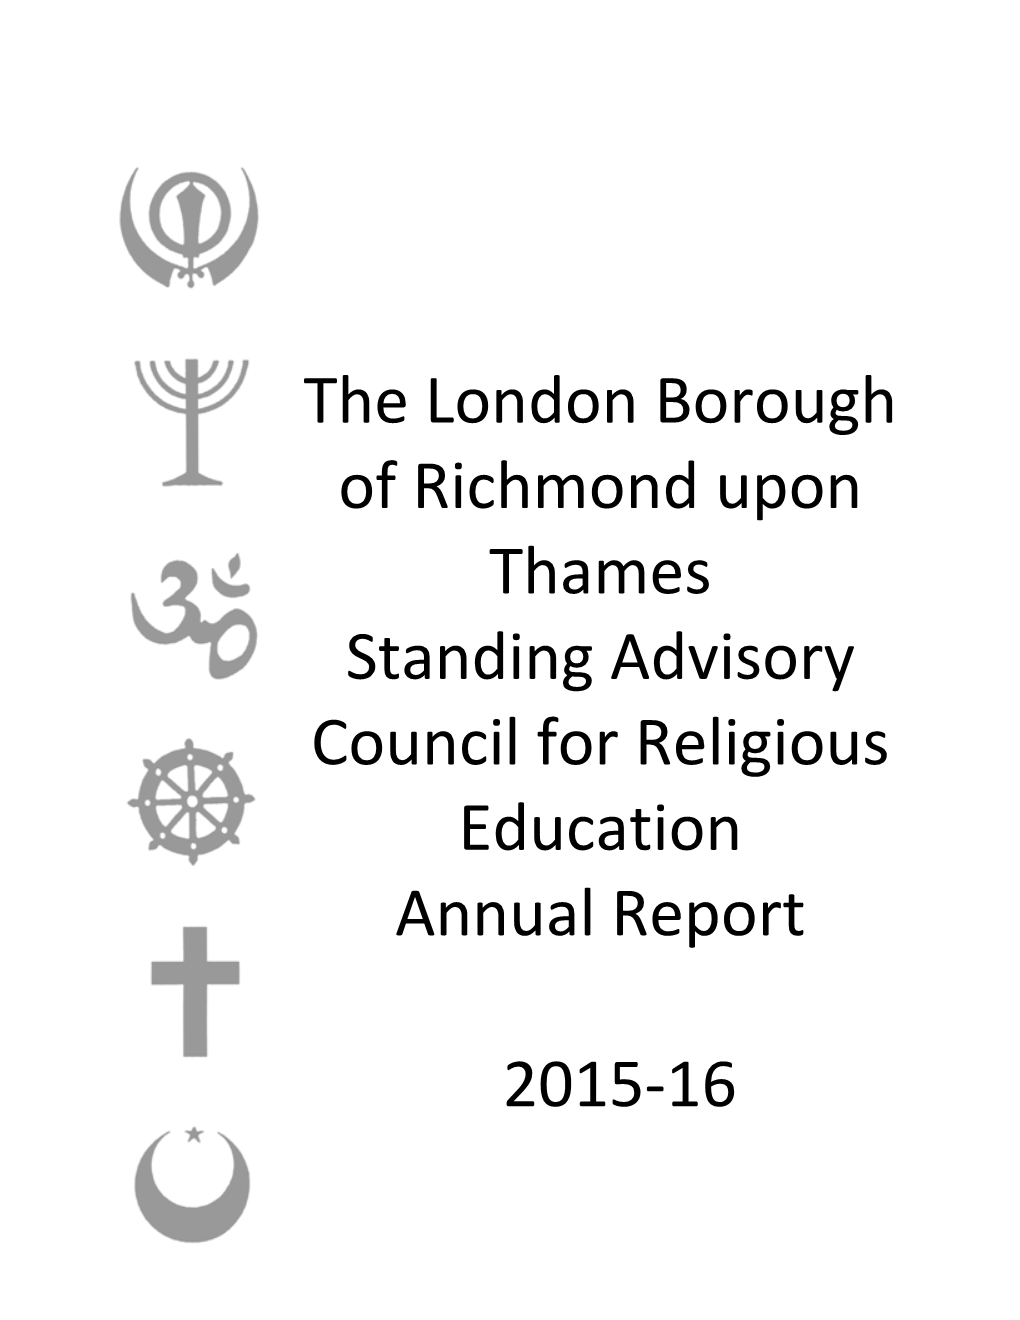 The London Borough of Richmond Upon Thames Standing Advisory Council for Religious Education Annual Report 2015-16